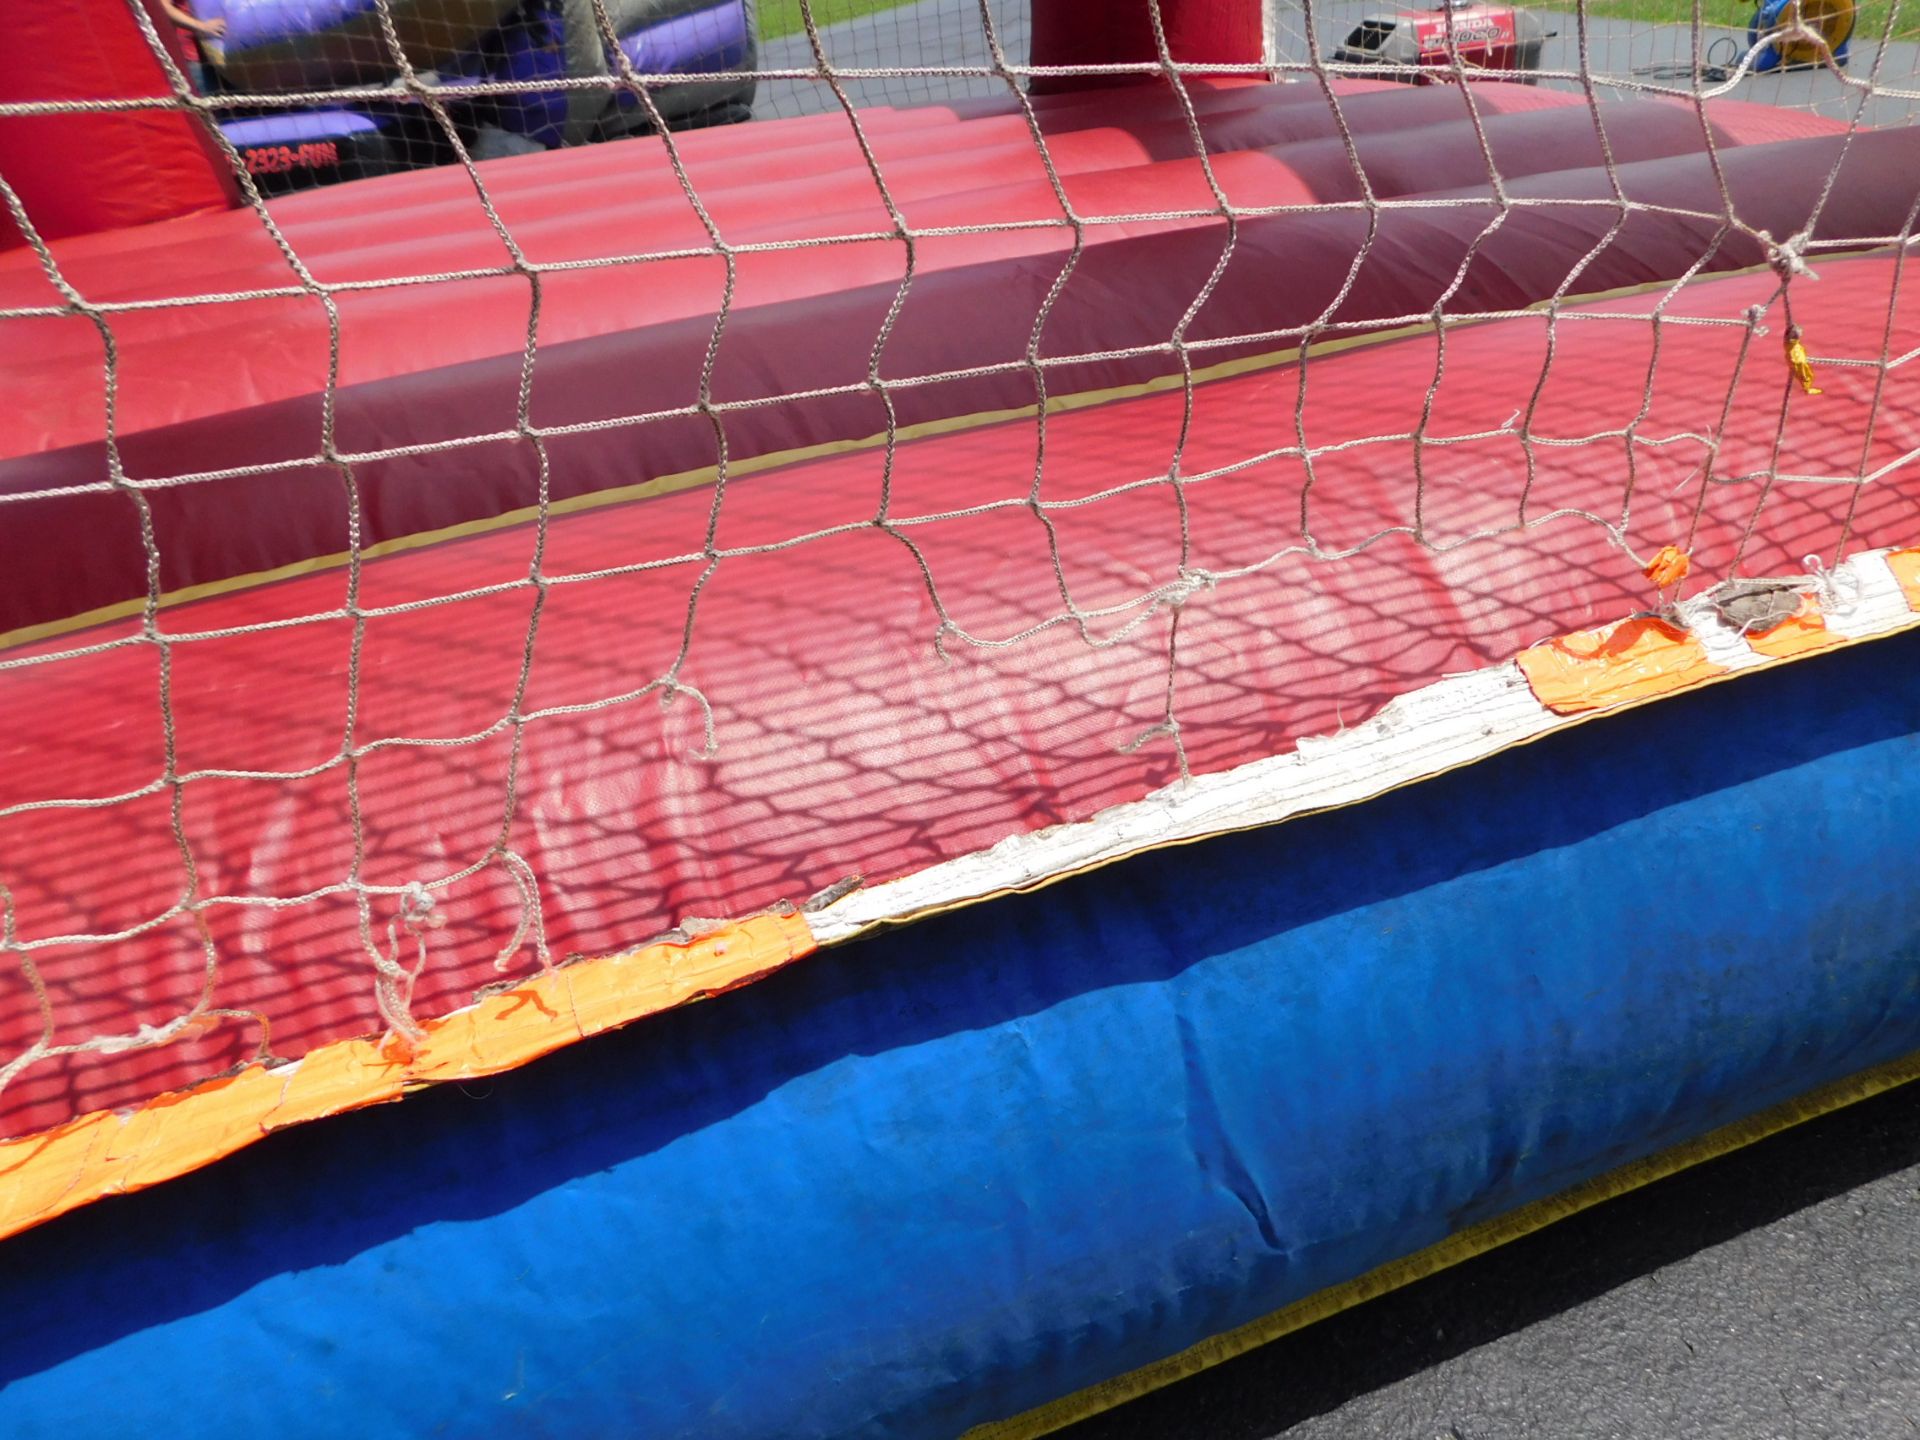 Inflatable Fun Service Bounce House, 1pc. 1 Blower required, Junior Jumper 11'WX11'LX9'H #104 - Image 12 of 12